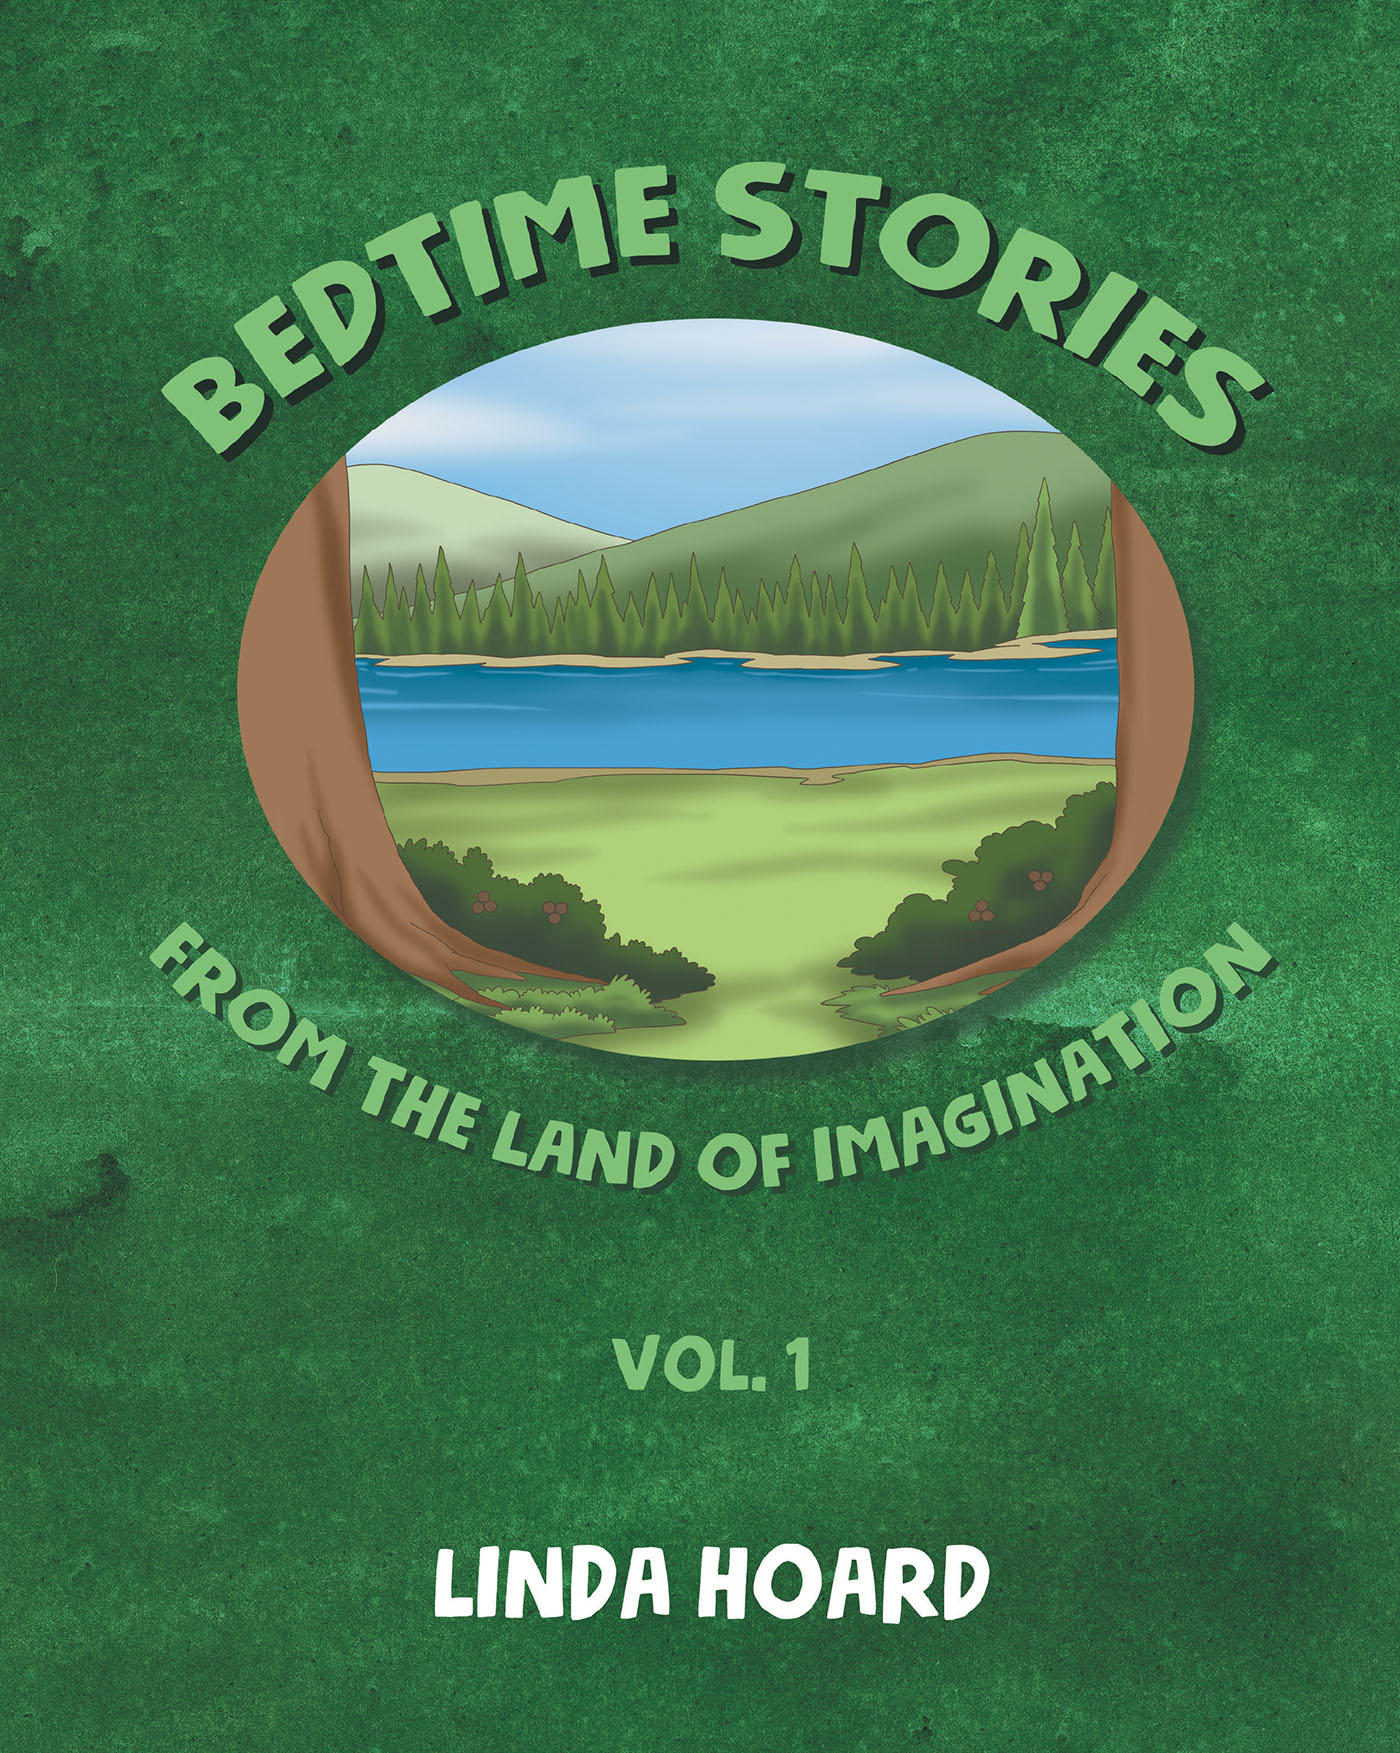 Bedtime Stories From the Land of Imagination Vol. 1 Cover Image